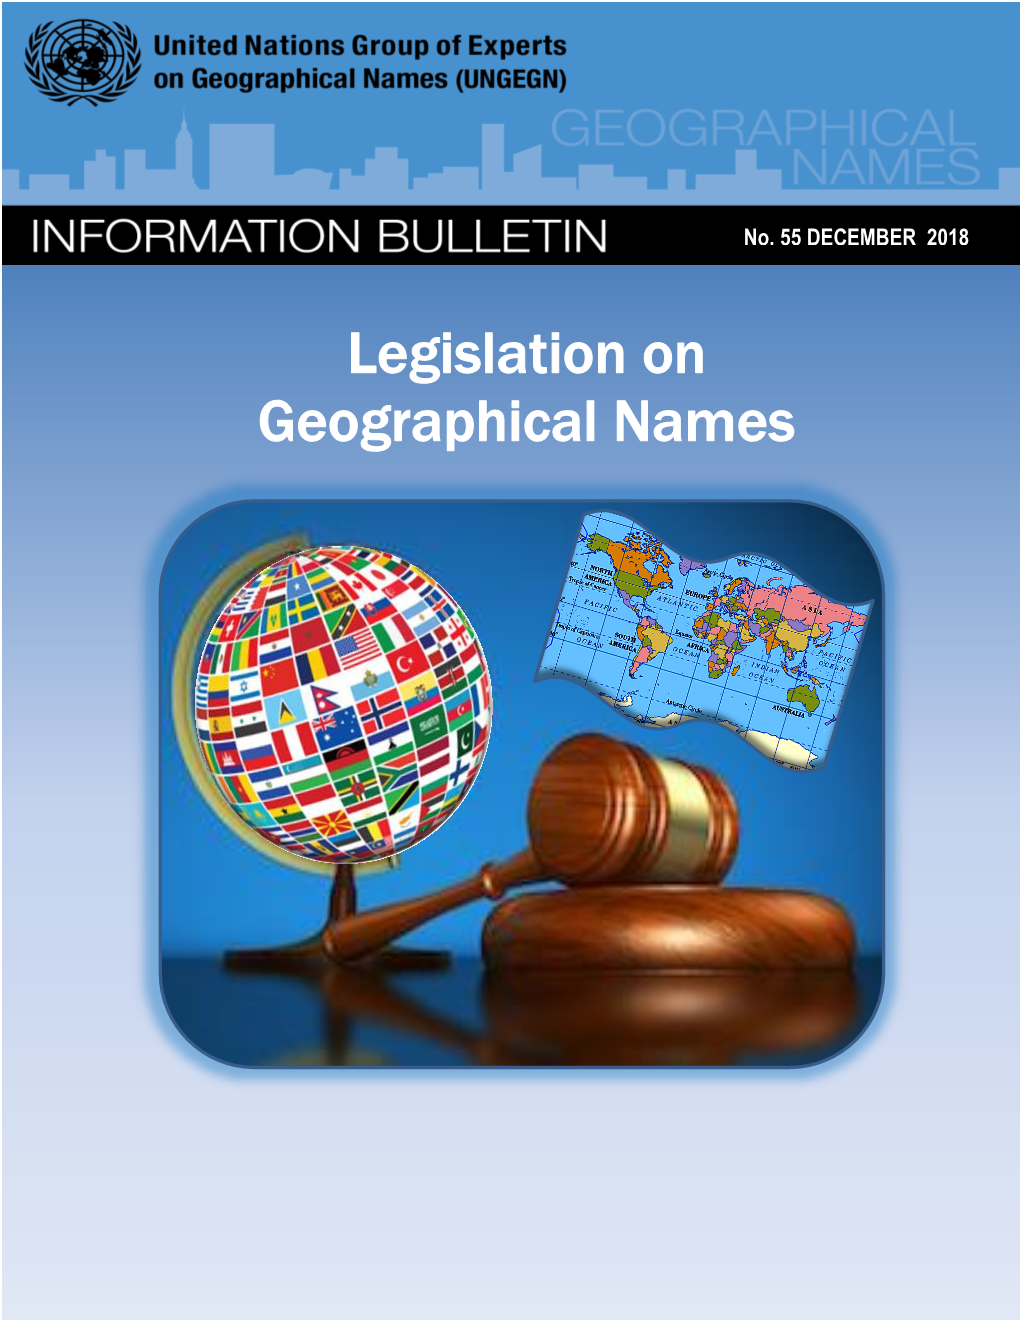 Legislation on Geographical Names in 5 and the UNGEGN Working Group on Publicity and Funding